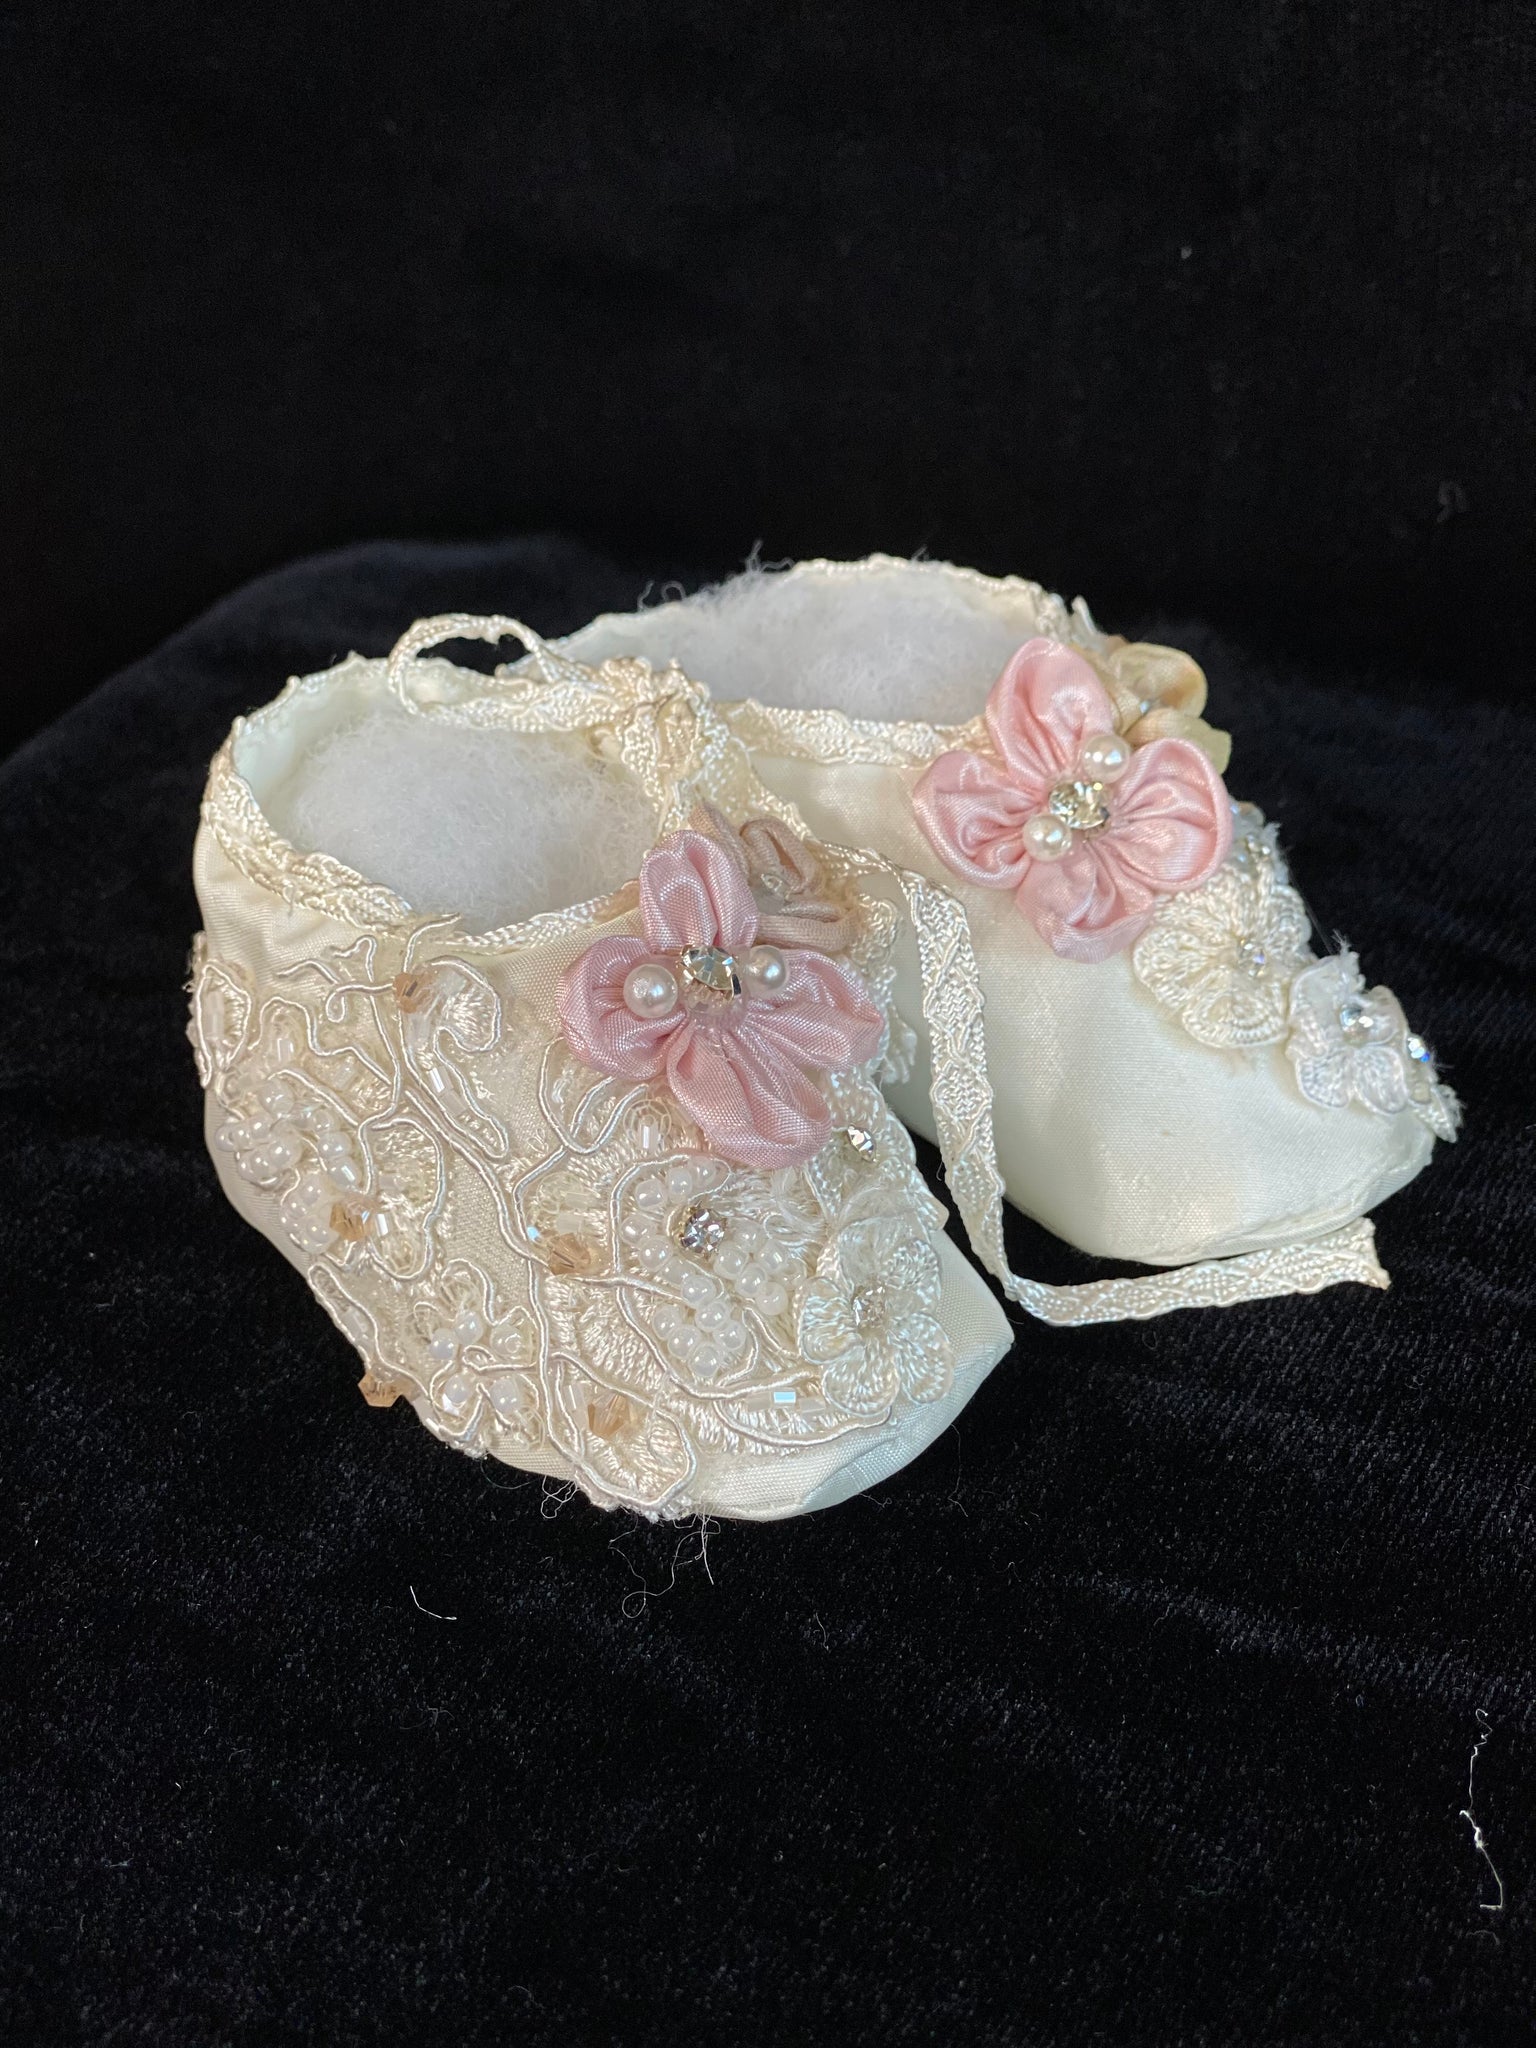 Elegant handmade ivory / white baby girl ankle boots with embroidery, lace, flowers, and jewels (pearls and crystals) with side string closure.